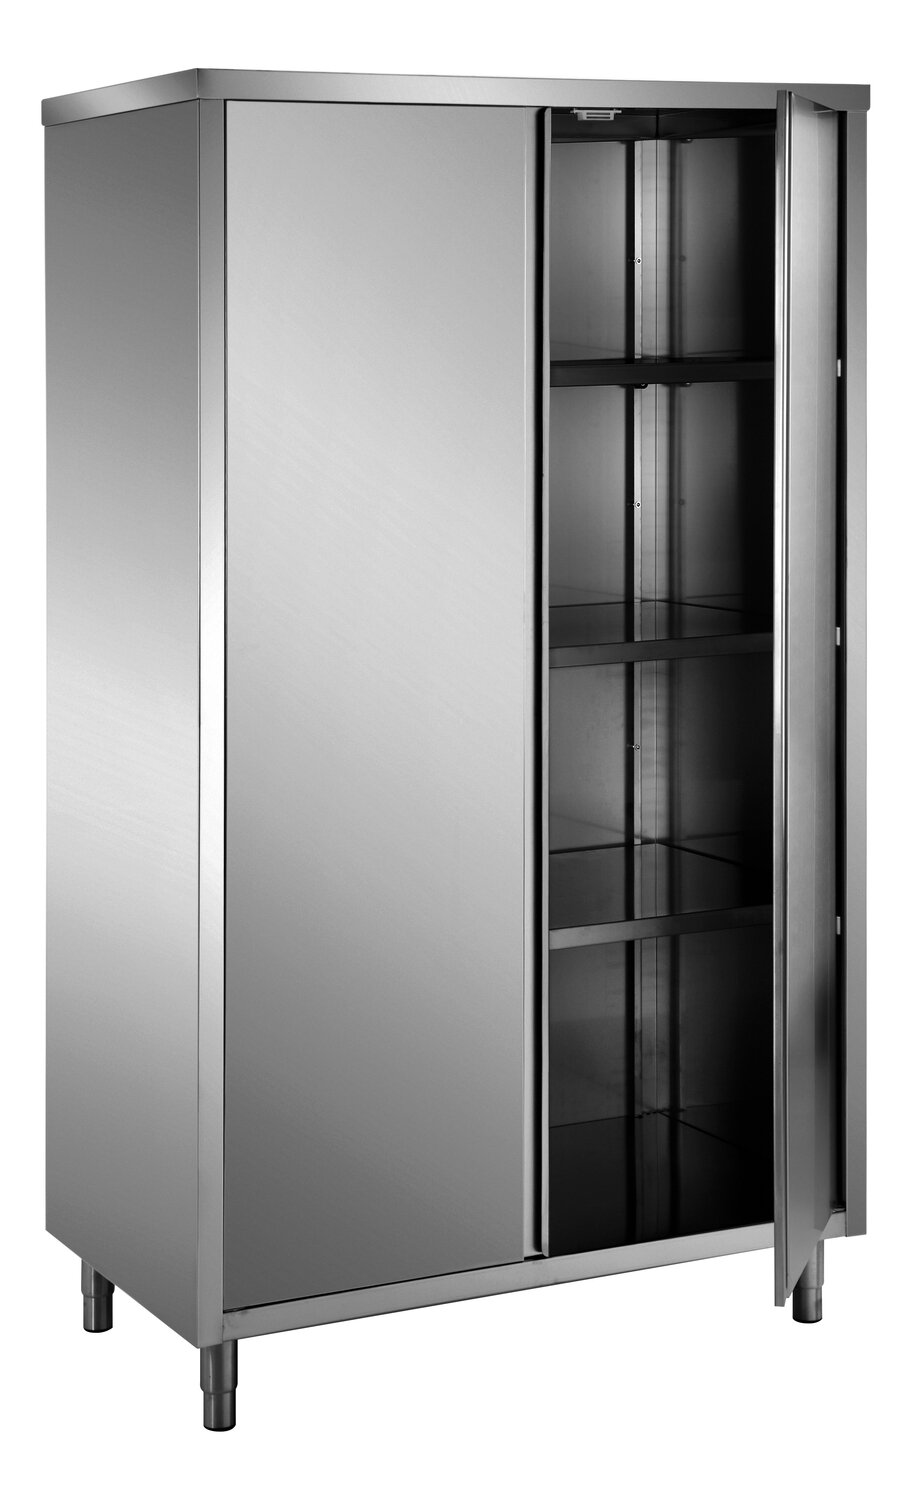 SARO Stainless steel storage cabinets with 2 hinged doors 1000x700 AISI 430